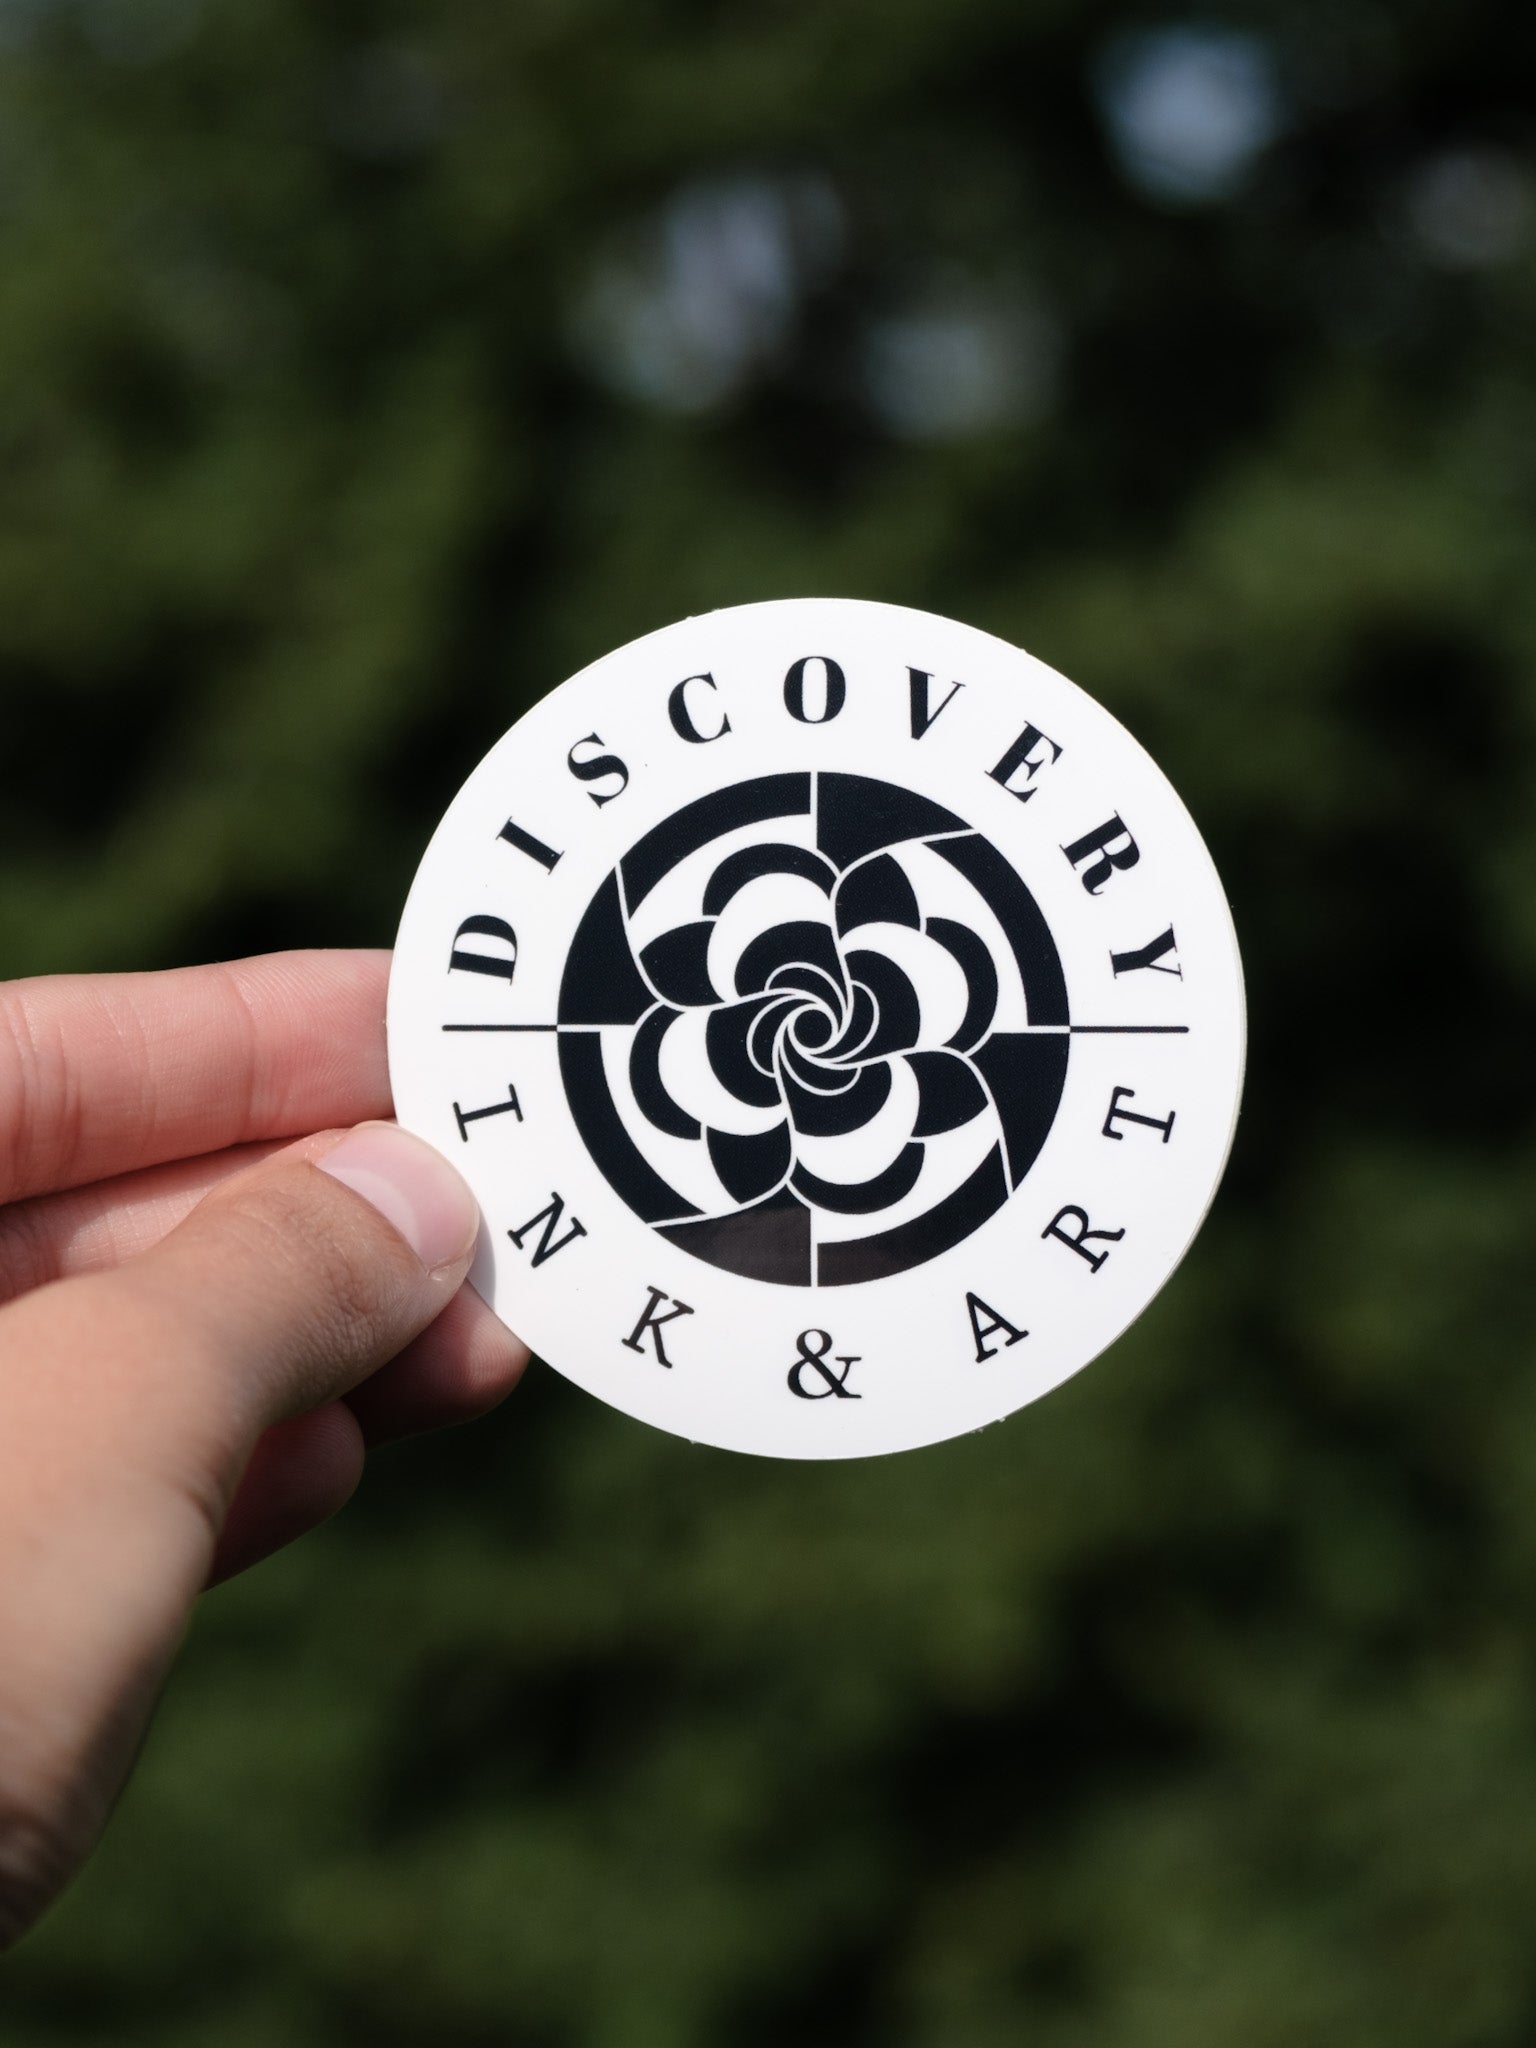 The Discovery Ink & Art Logo featuring: Discovery Ink & Art circled around a mandala-inspired floral logo